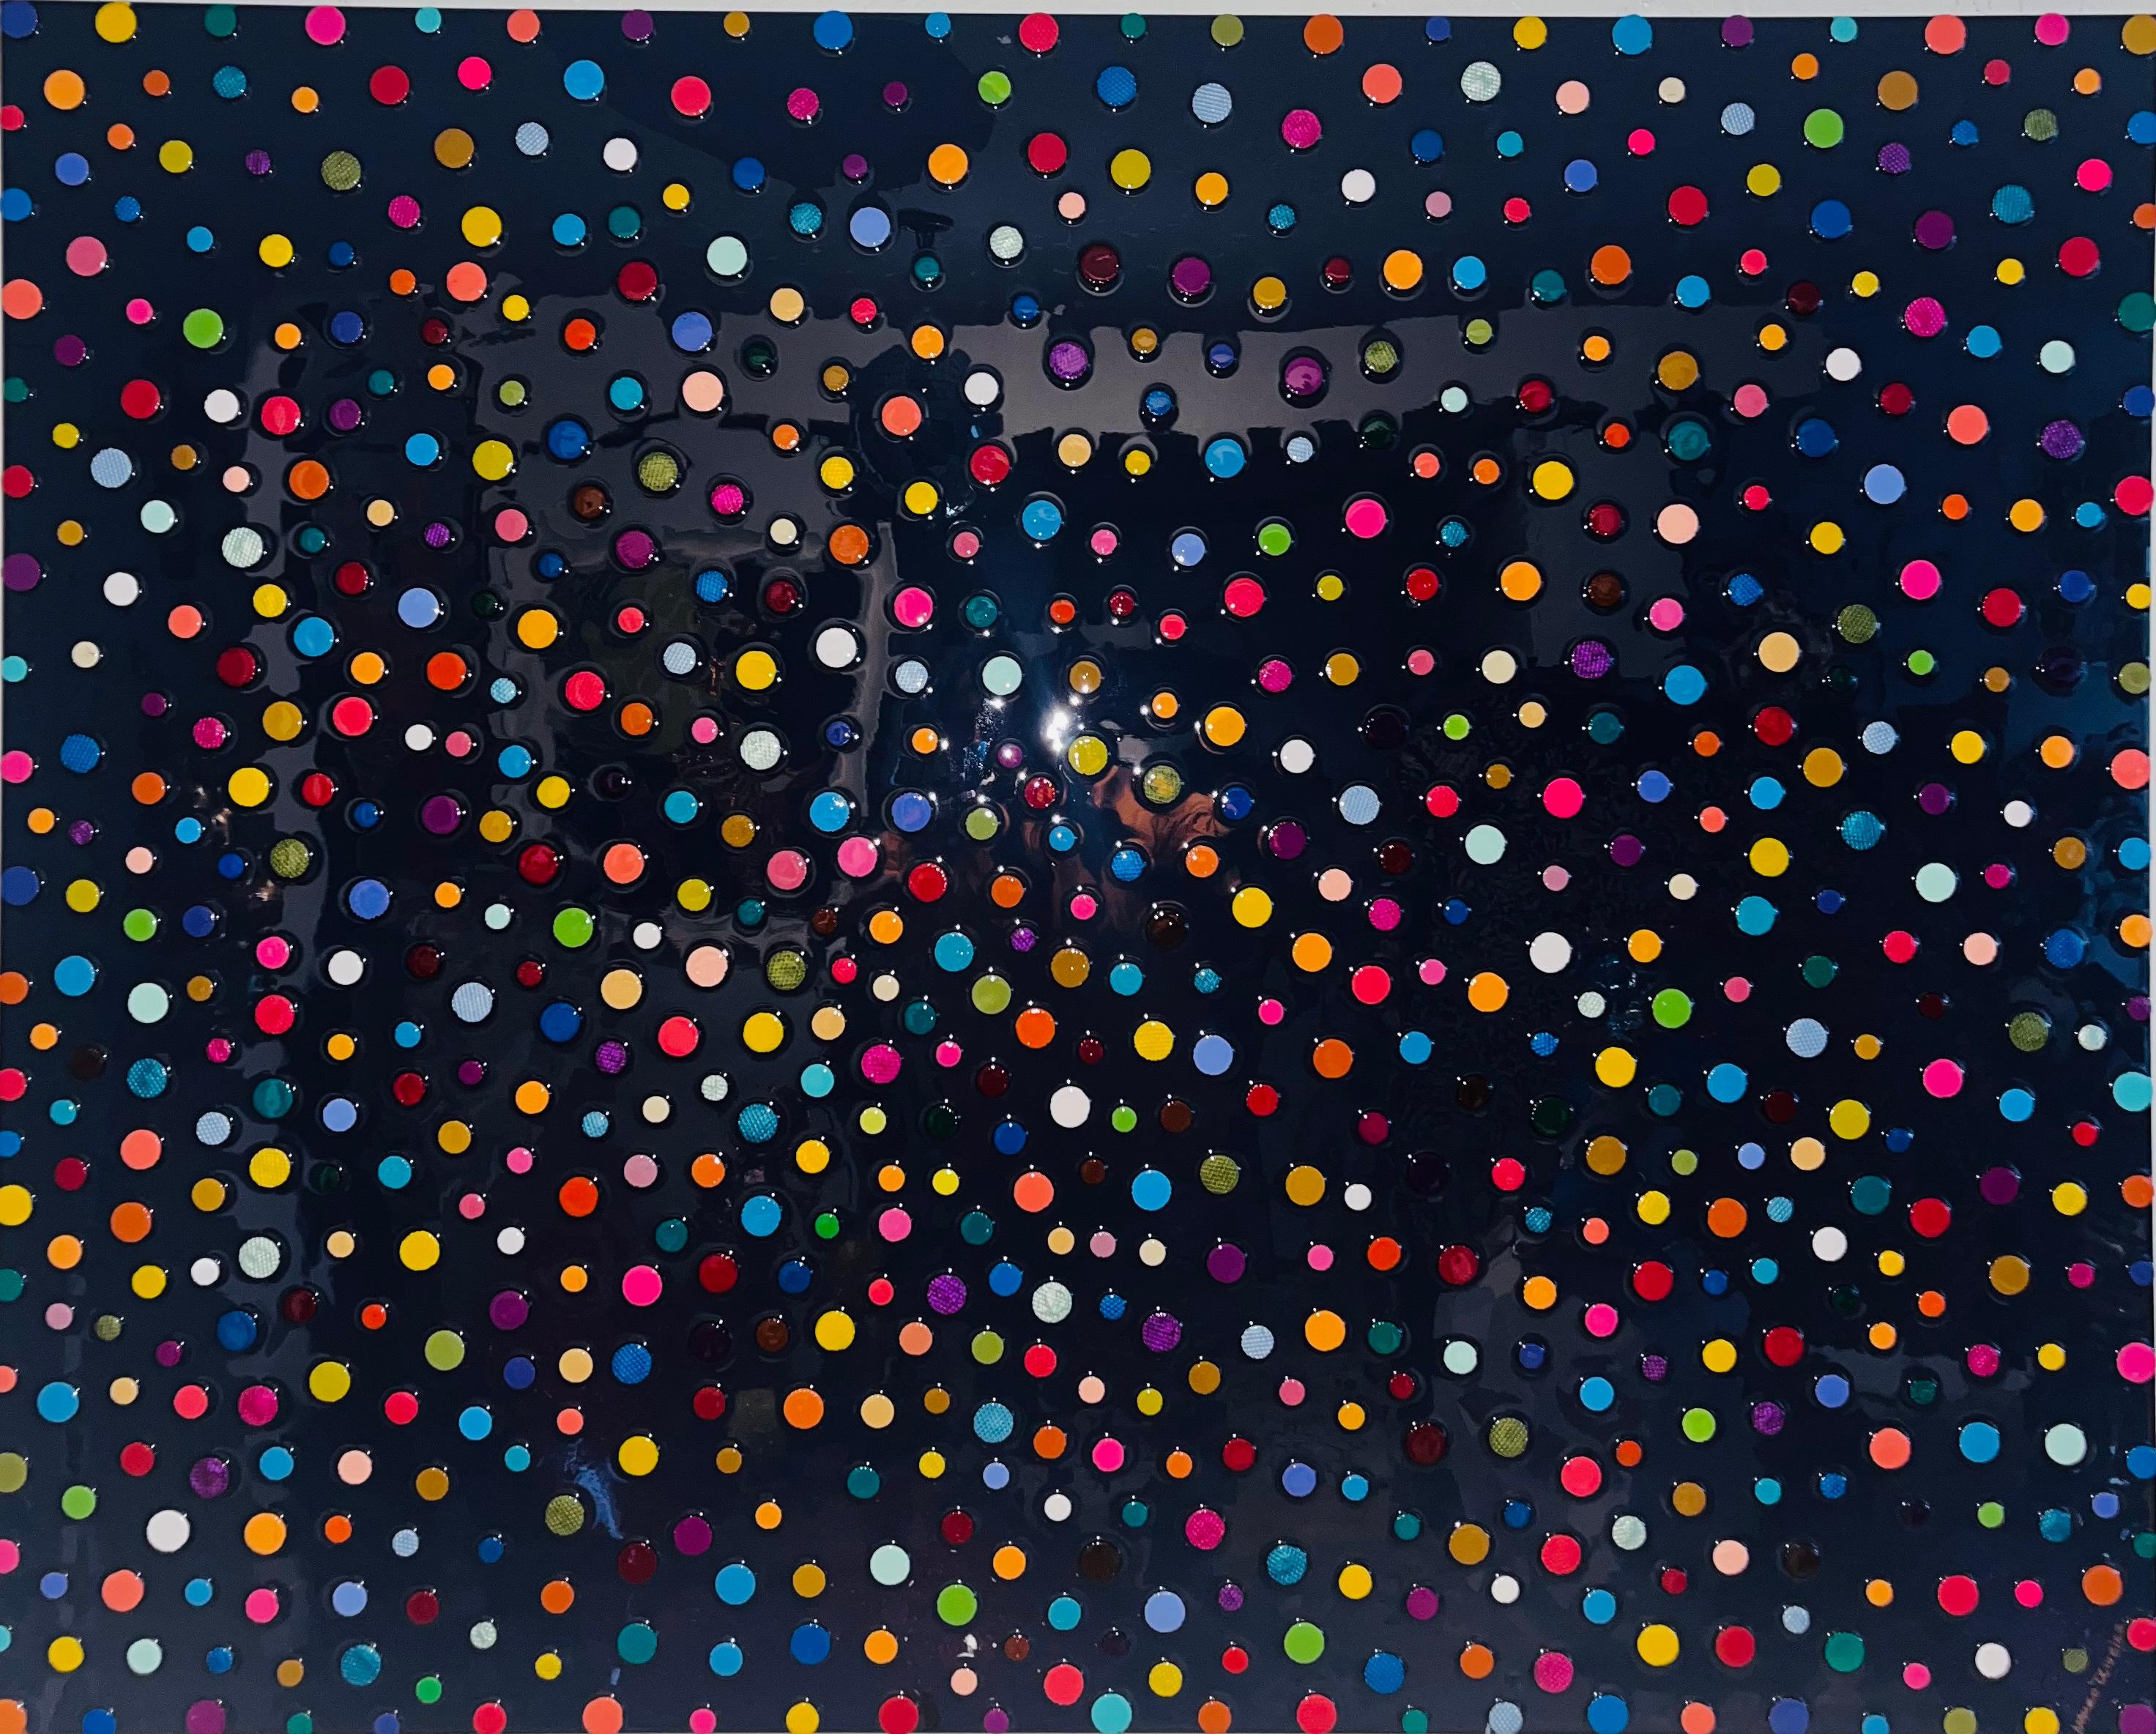                  **ANNUAL SUPER SALE TIL JUNE 15th ONLY**
*This Price Won't Be Repeated Again This Year - Take Advantage Of It*

A handful of artist 'masters' colorful dots but all or most are done by machines/printers. Oliveira dots are done and